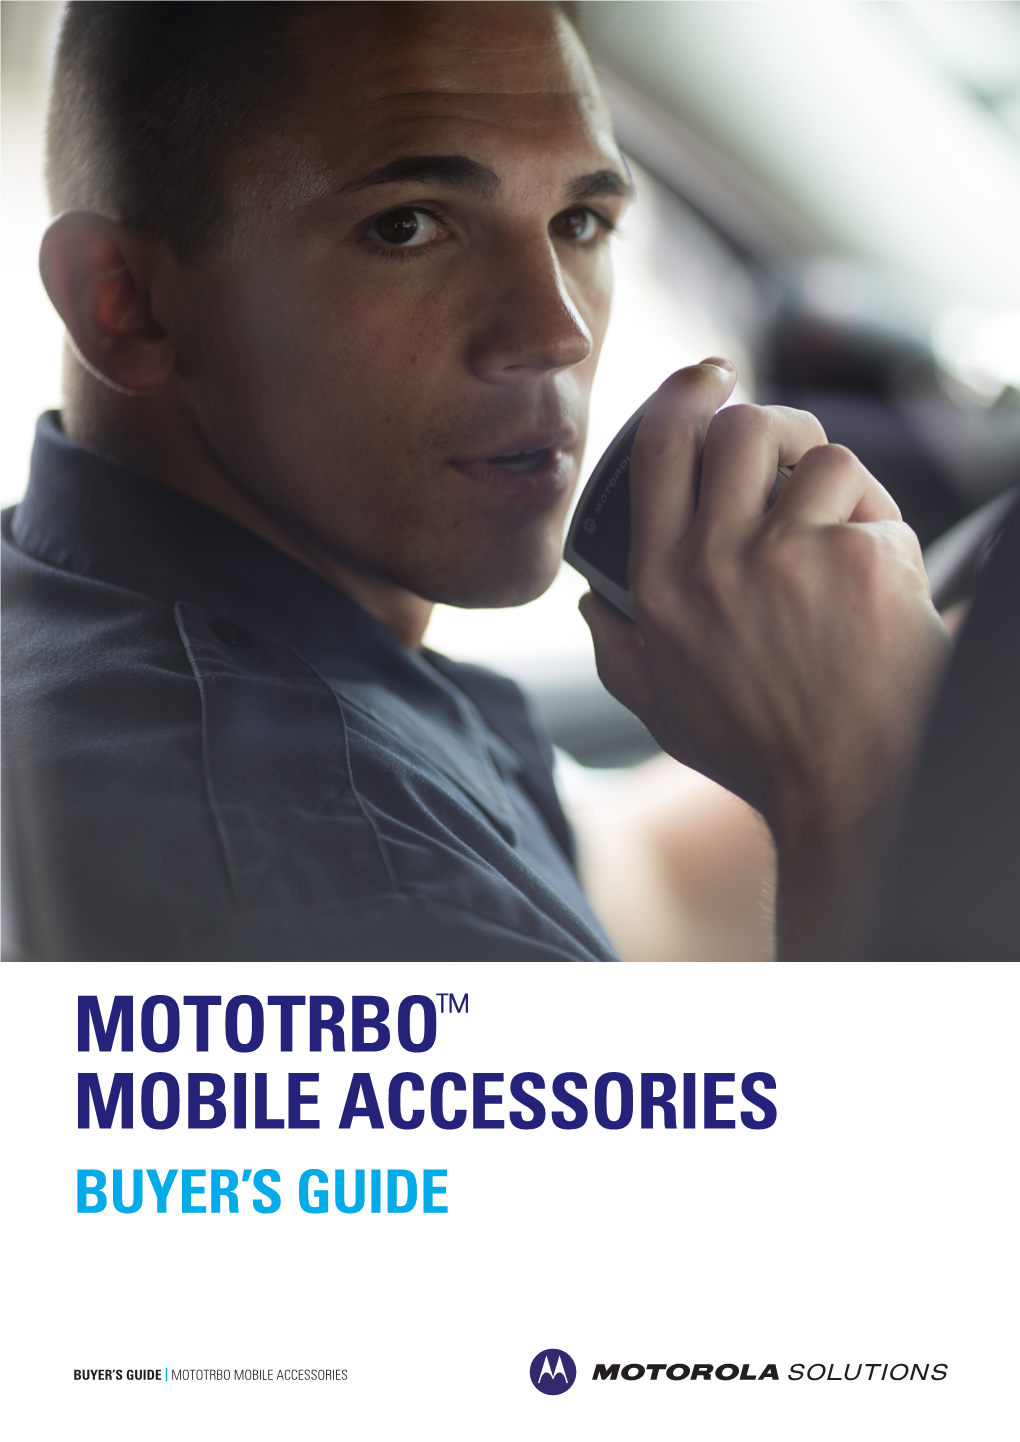 MOTOTRBO Mobile Accessories Buyer's Guide